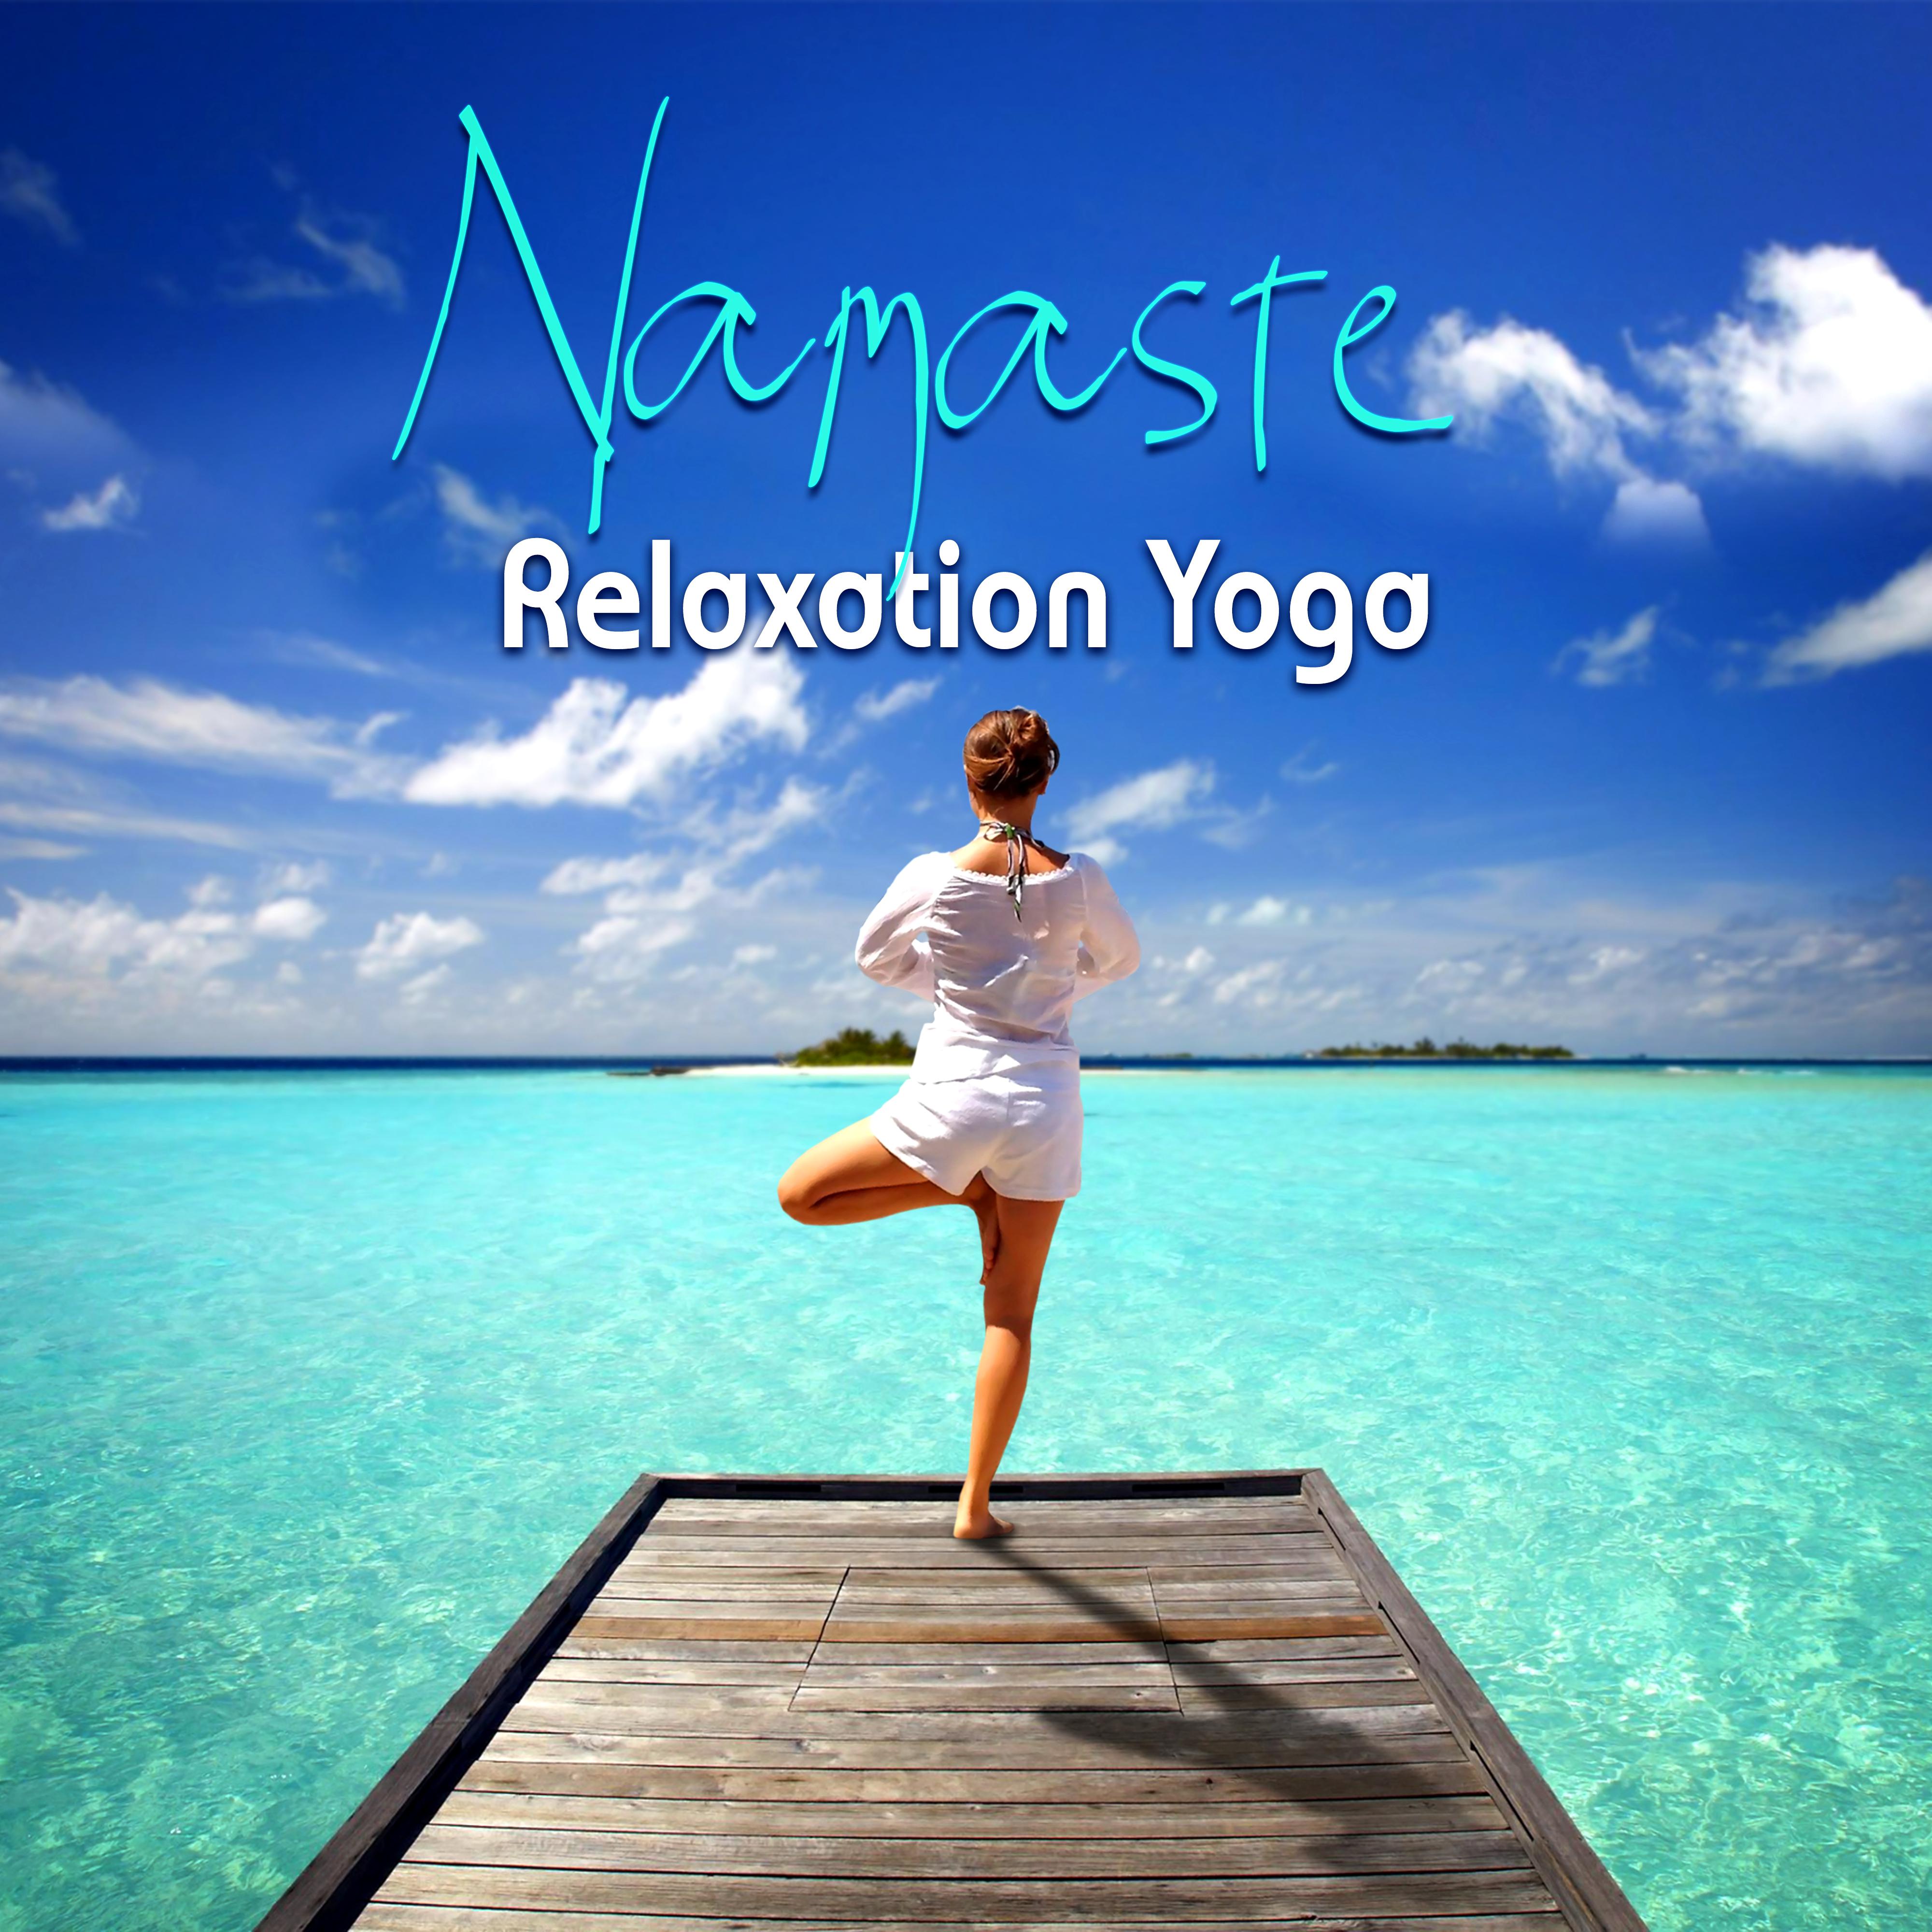 Namaste Relaxation Yoga – Peaceful Music for Yoga Classes and Relaxation, Relax Your Mind, Guided Mindfulness Meditation